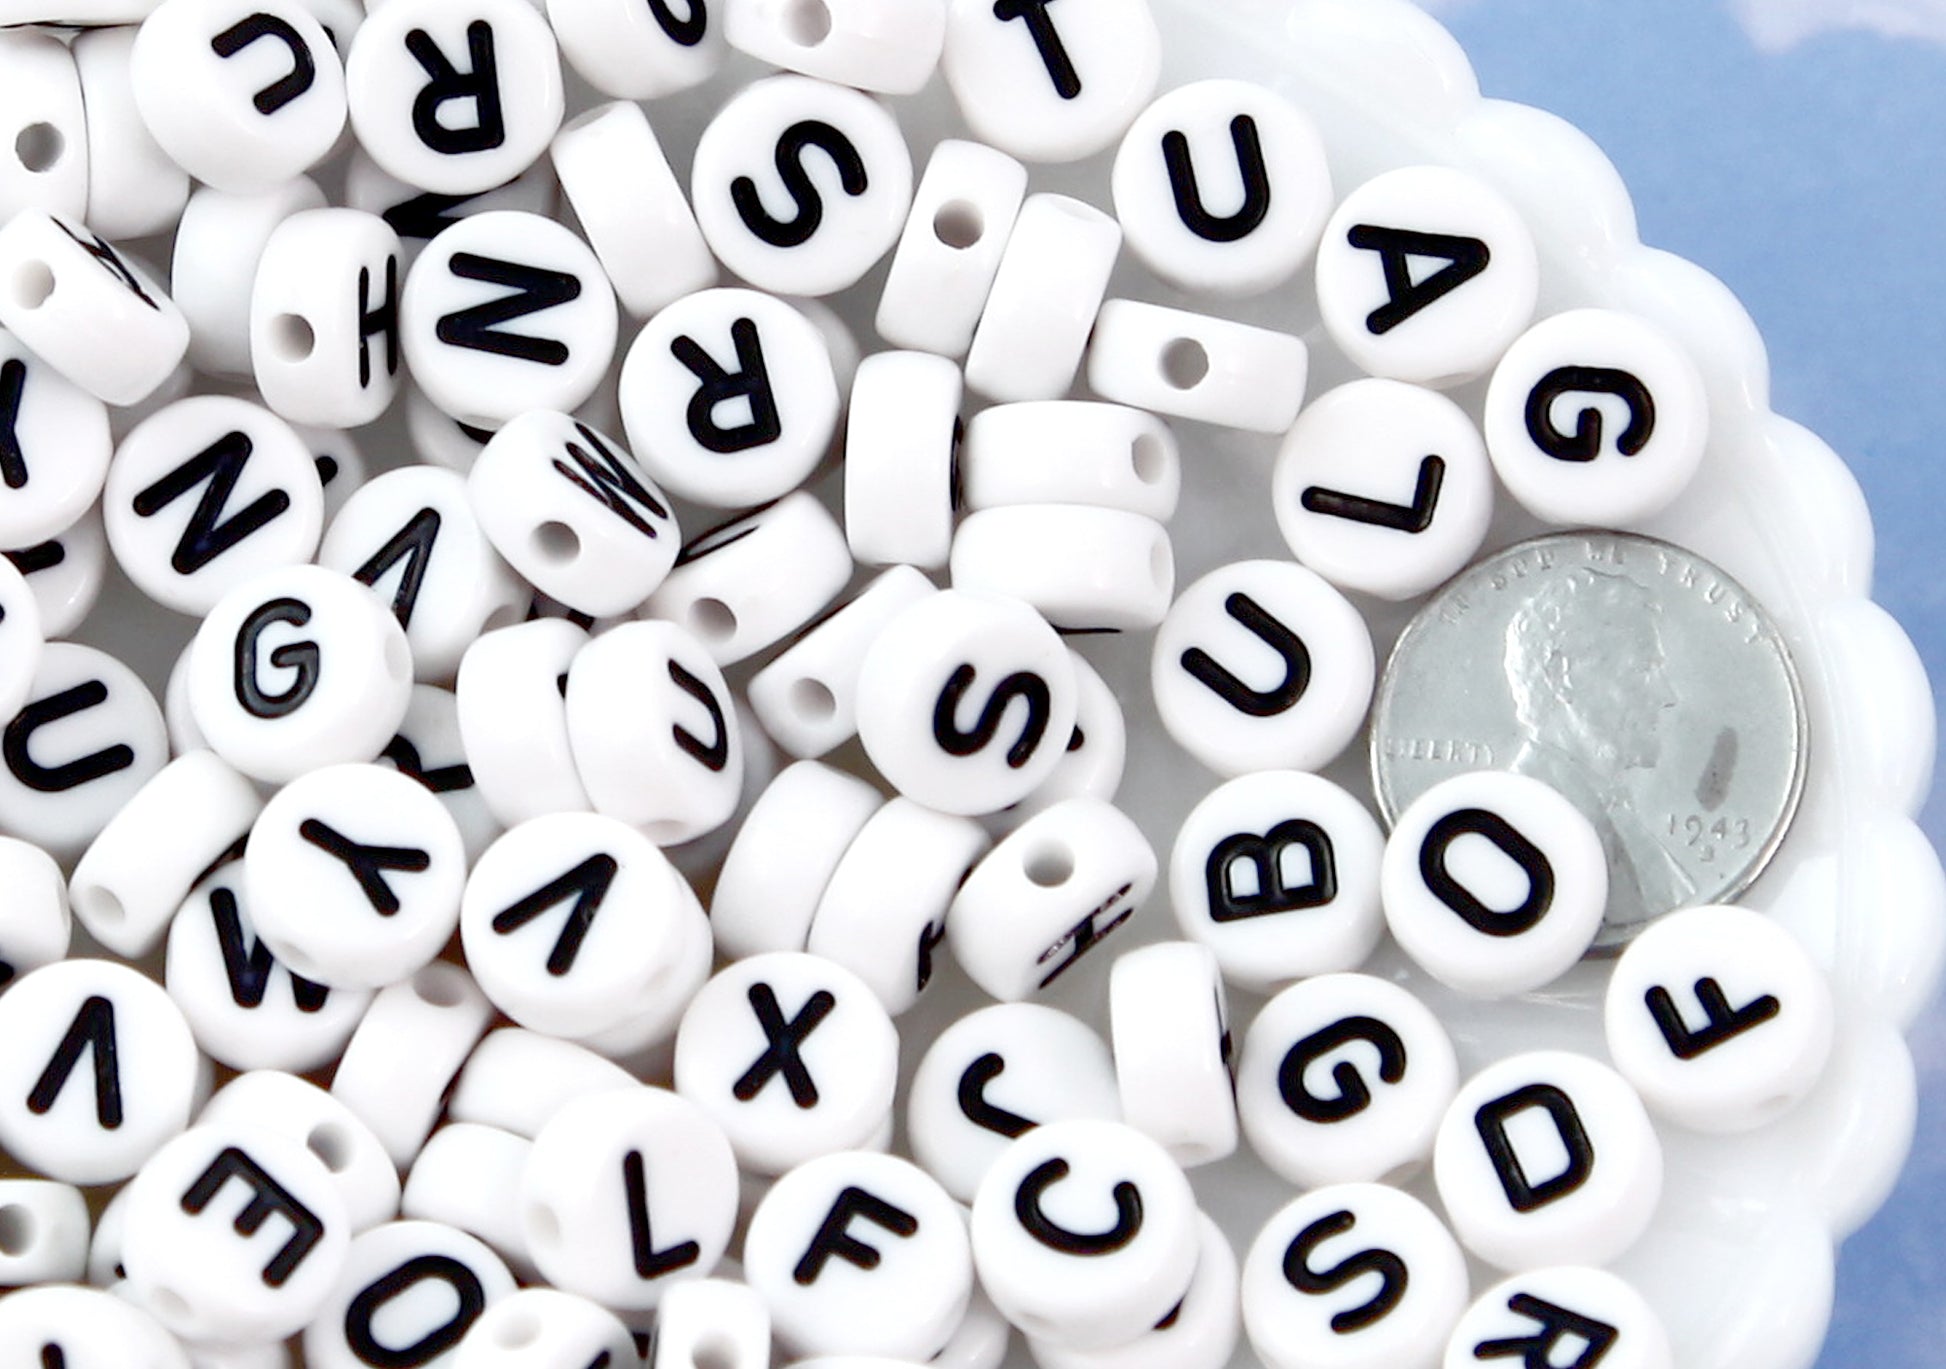 Free Shipping 10*10MM Square Acrylic Letter Beads Single Alphabet